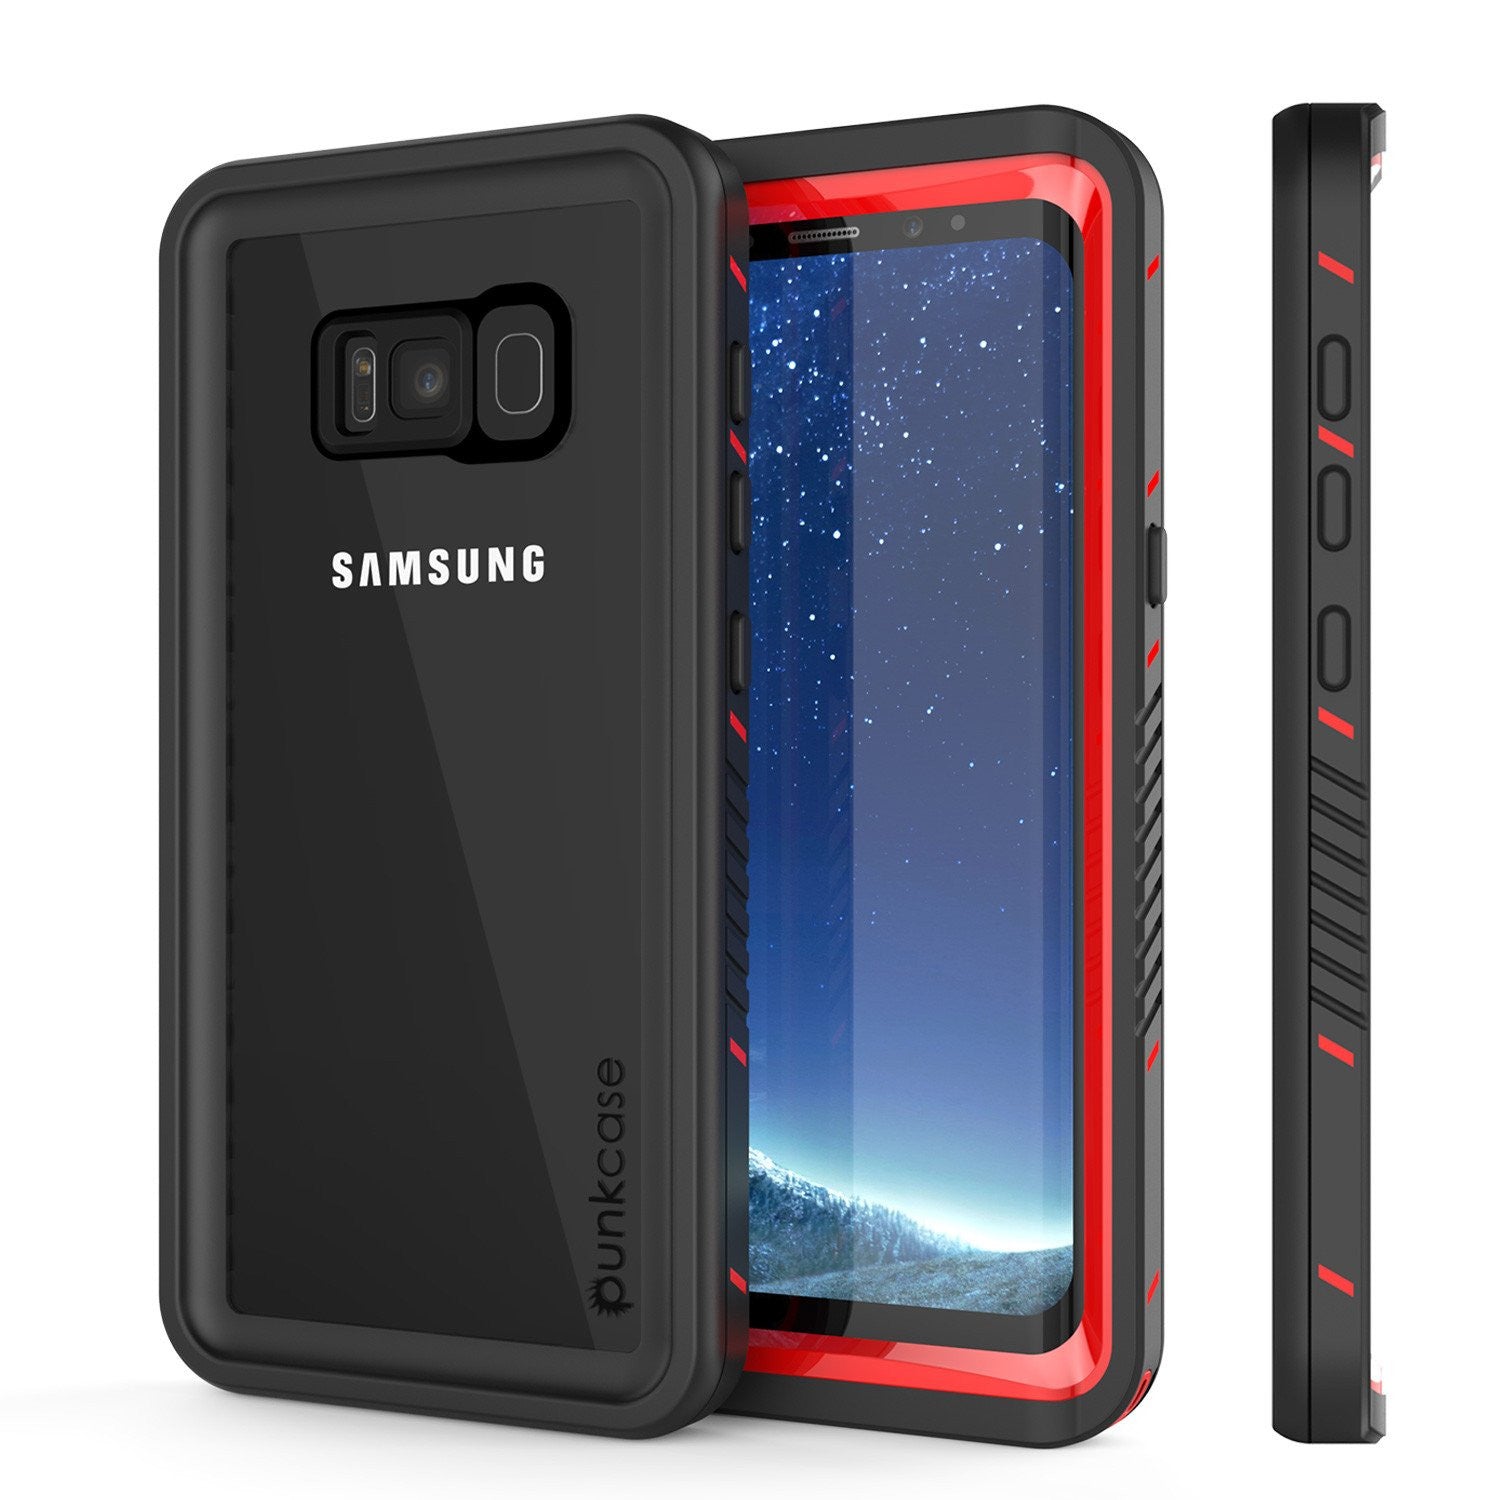 Galaxy S8 Waterproof Case, Punkcase [Extreme Series] [Slim Fit] [IP68 Certified] [Shockproof] [Snowproof] [Dirproof] Armor Cover W/ Built In Screen Protector for Samsung Galaxy S8 [Red] (Color in image: Red)